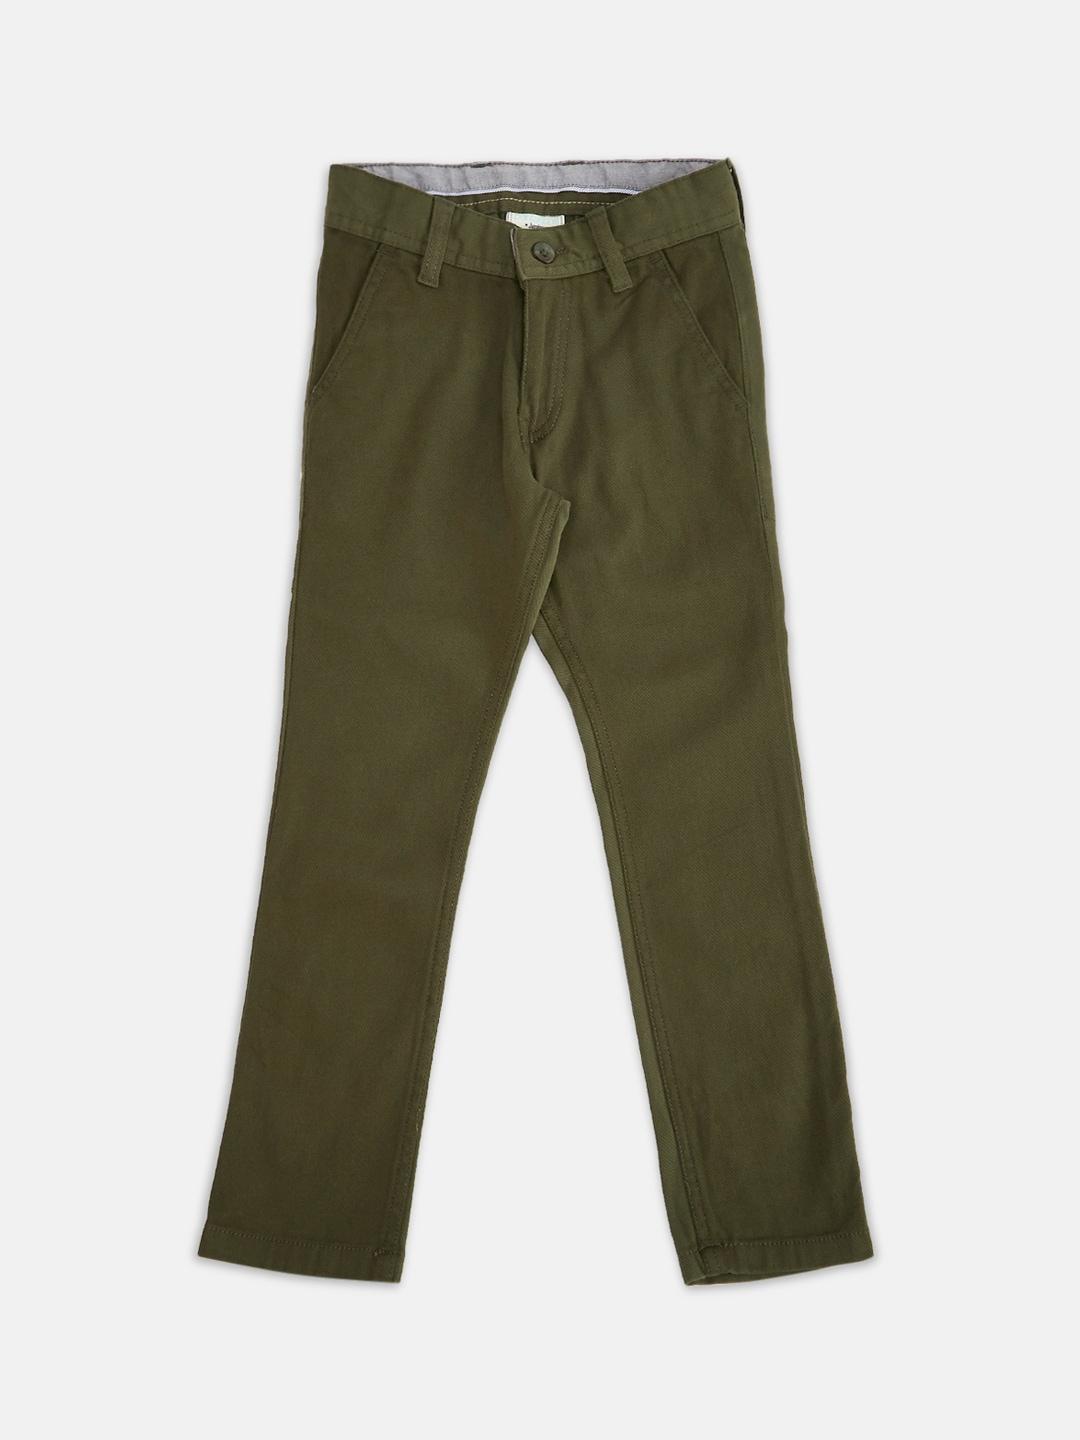 Pantaloons Junior Boys Olive Solid Cotton Chinos Trouser